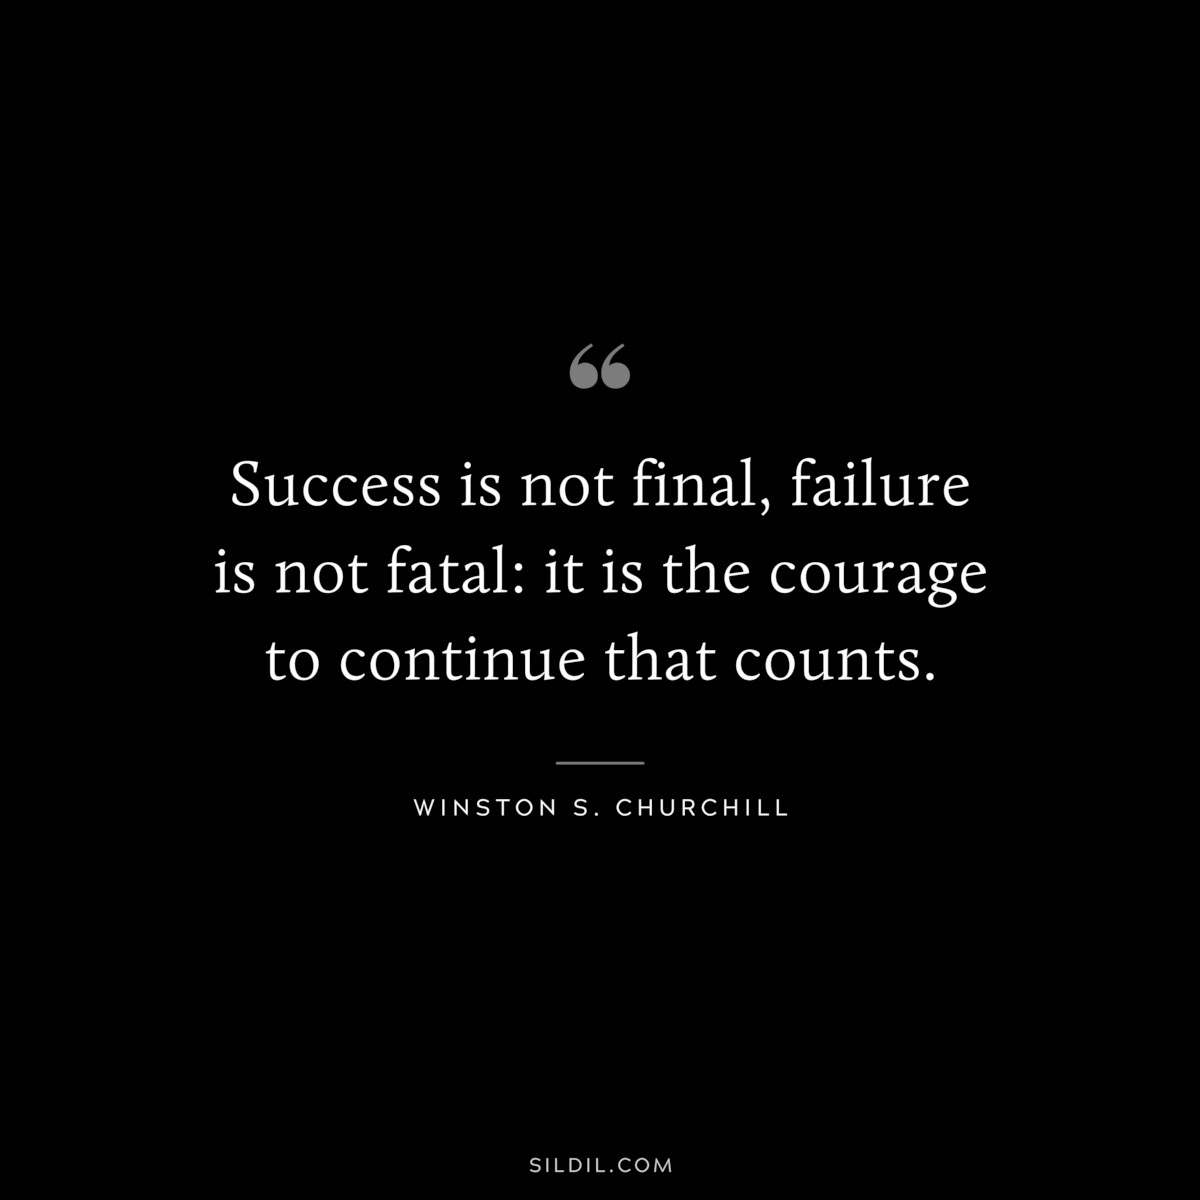 Success is not final, failure is not fatal: it is the courage to continue that counts. ― Winston S. Churchill